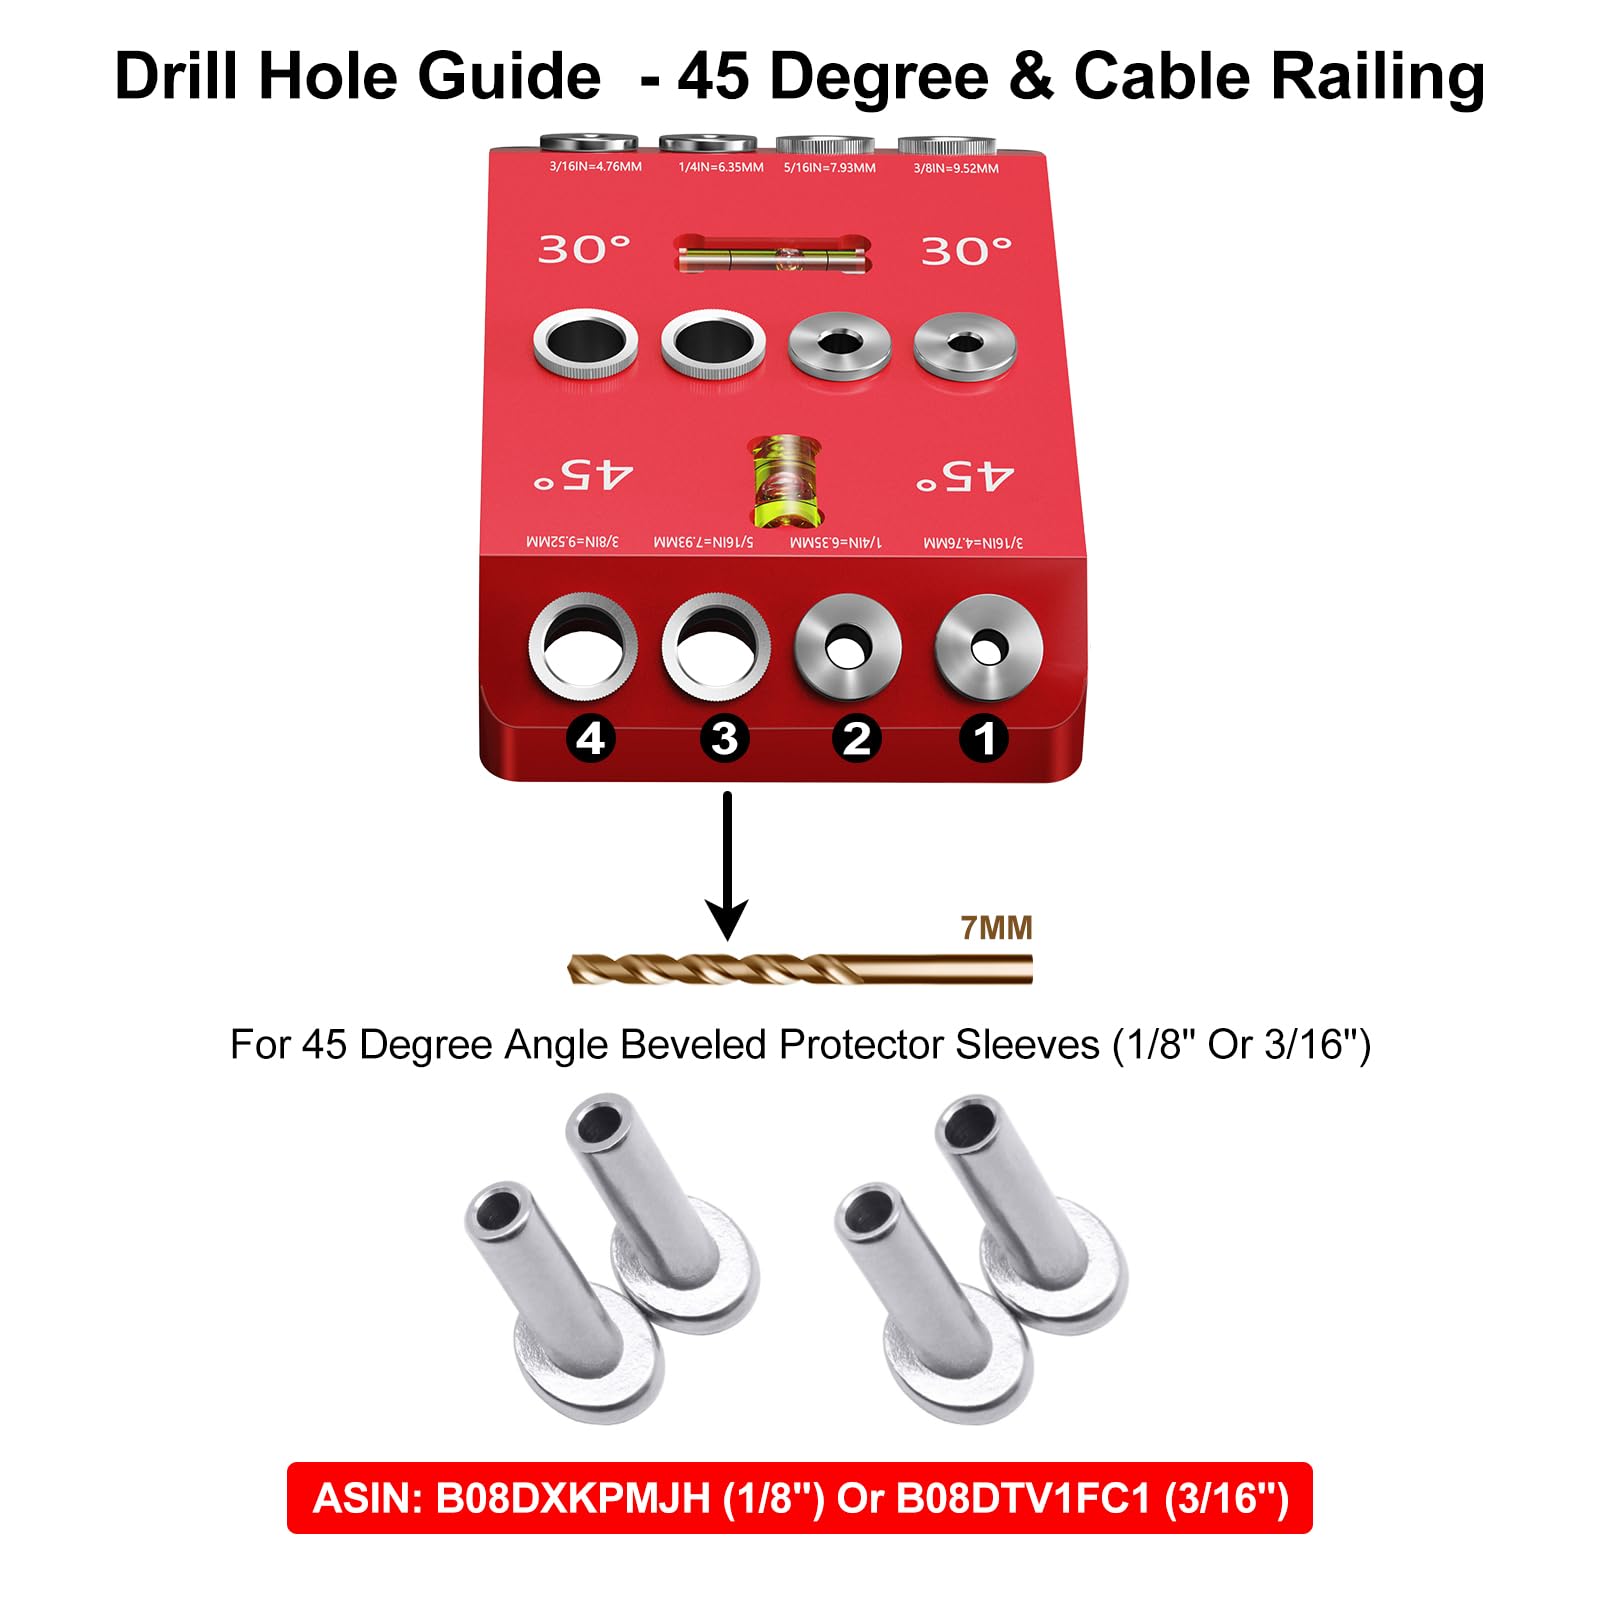 CKE 30 45 90 Degree Angle 4 Sizes Drill Hole Guide Jig with 3 Drill Bits for Angled Straight Hole, Deck Cable Railing Lag Screw Drilling Template Block for Horizontal Cable Wood Post Handrail DG02